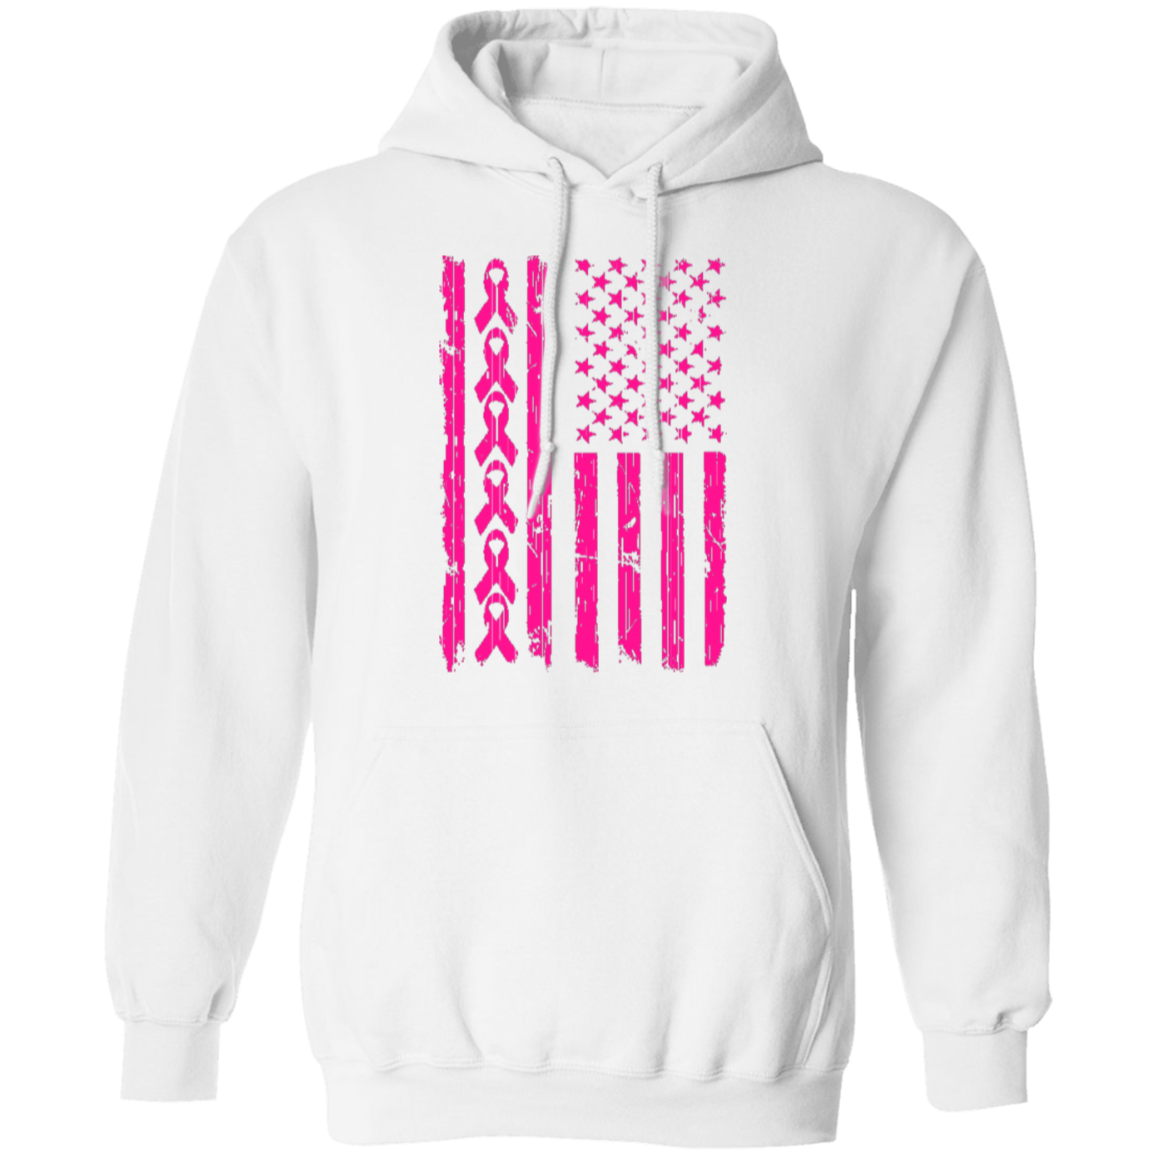 Breast Cancer Support Pullover Hoodie